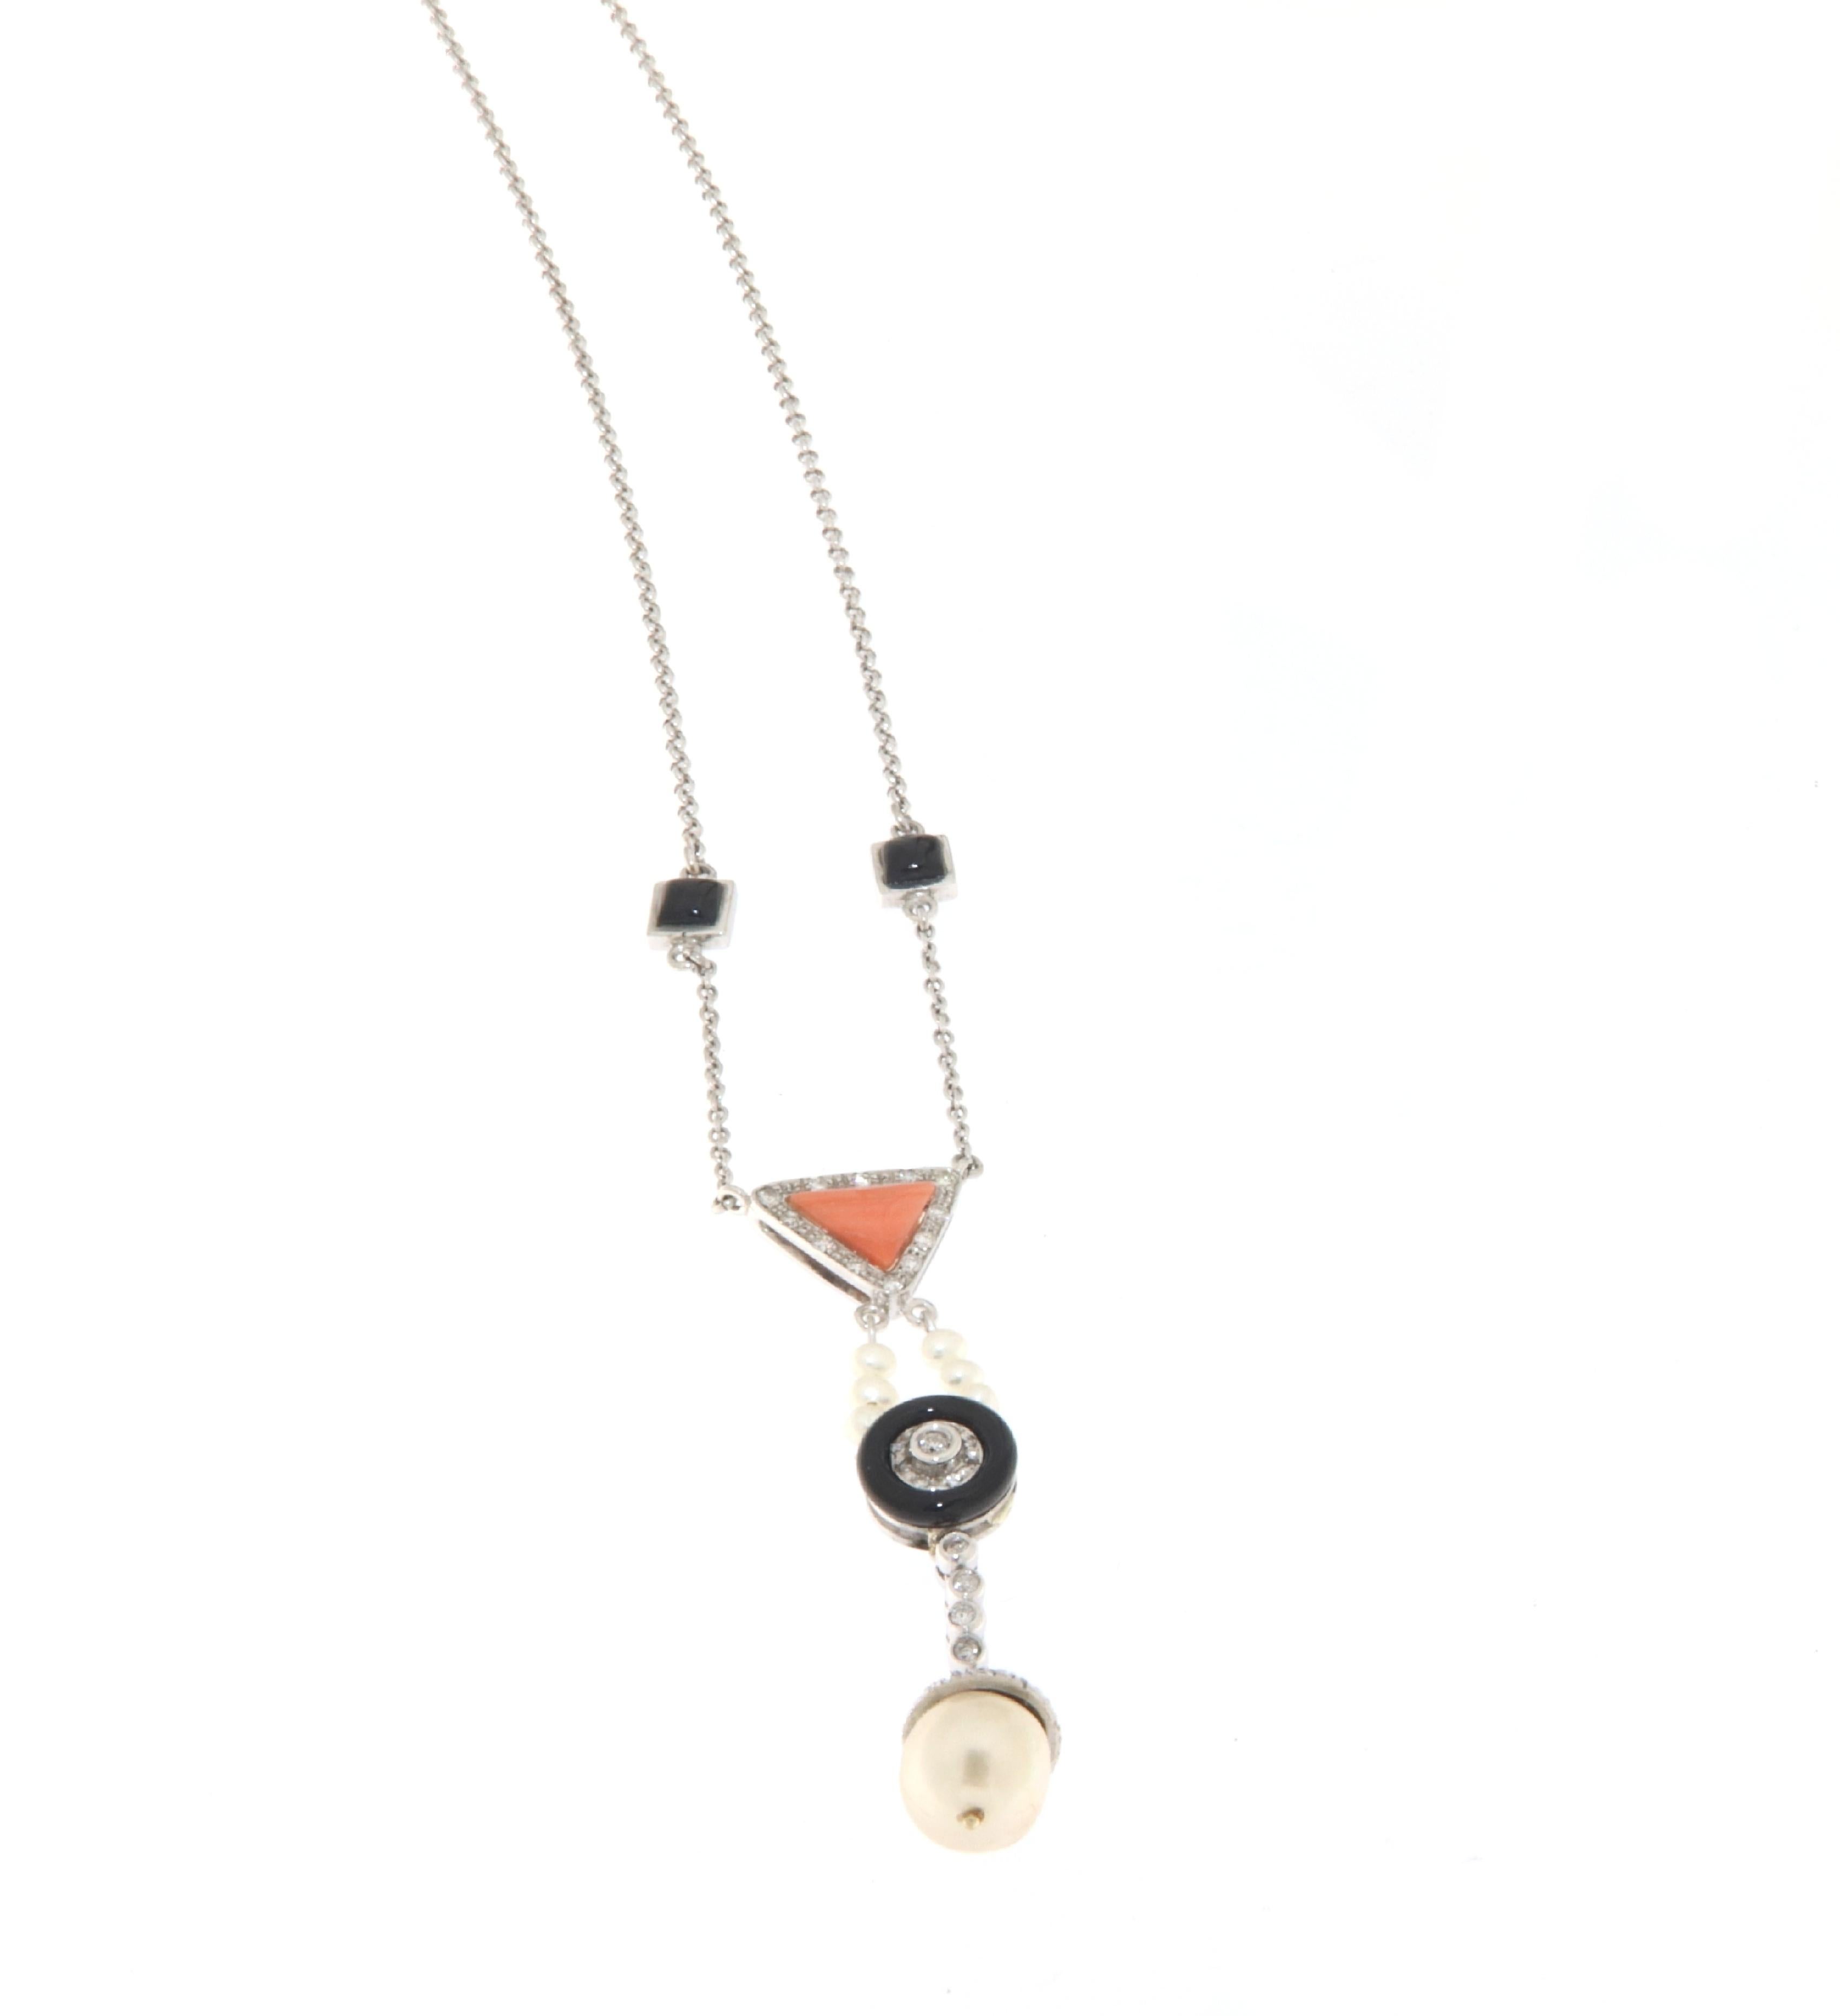 This exquisite necklace, artfully crafted in 18-karat white gold, presents a pendant that is a symphony of natural beauty and sophistication. Gracefully suspended, the pendant features an elegant array of pearls, a natural coral inlay, onyx accents,